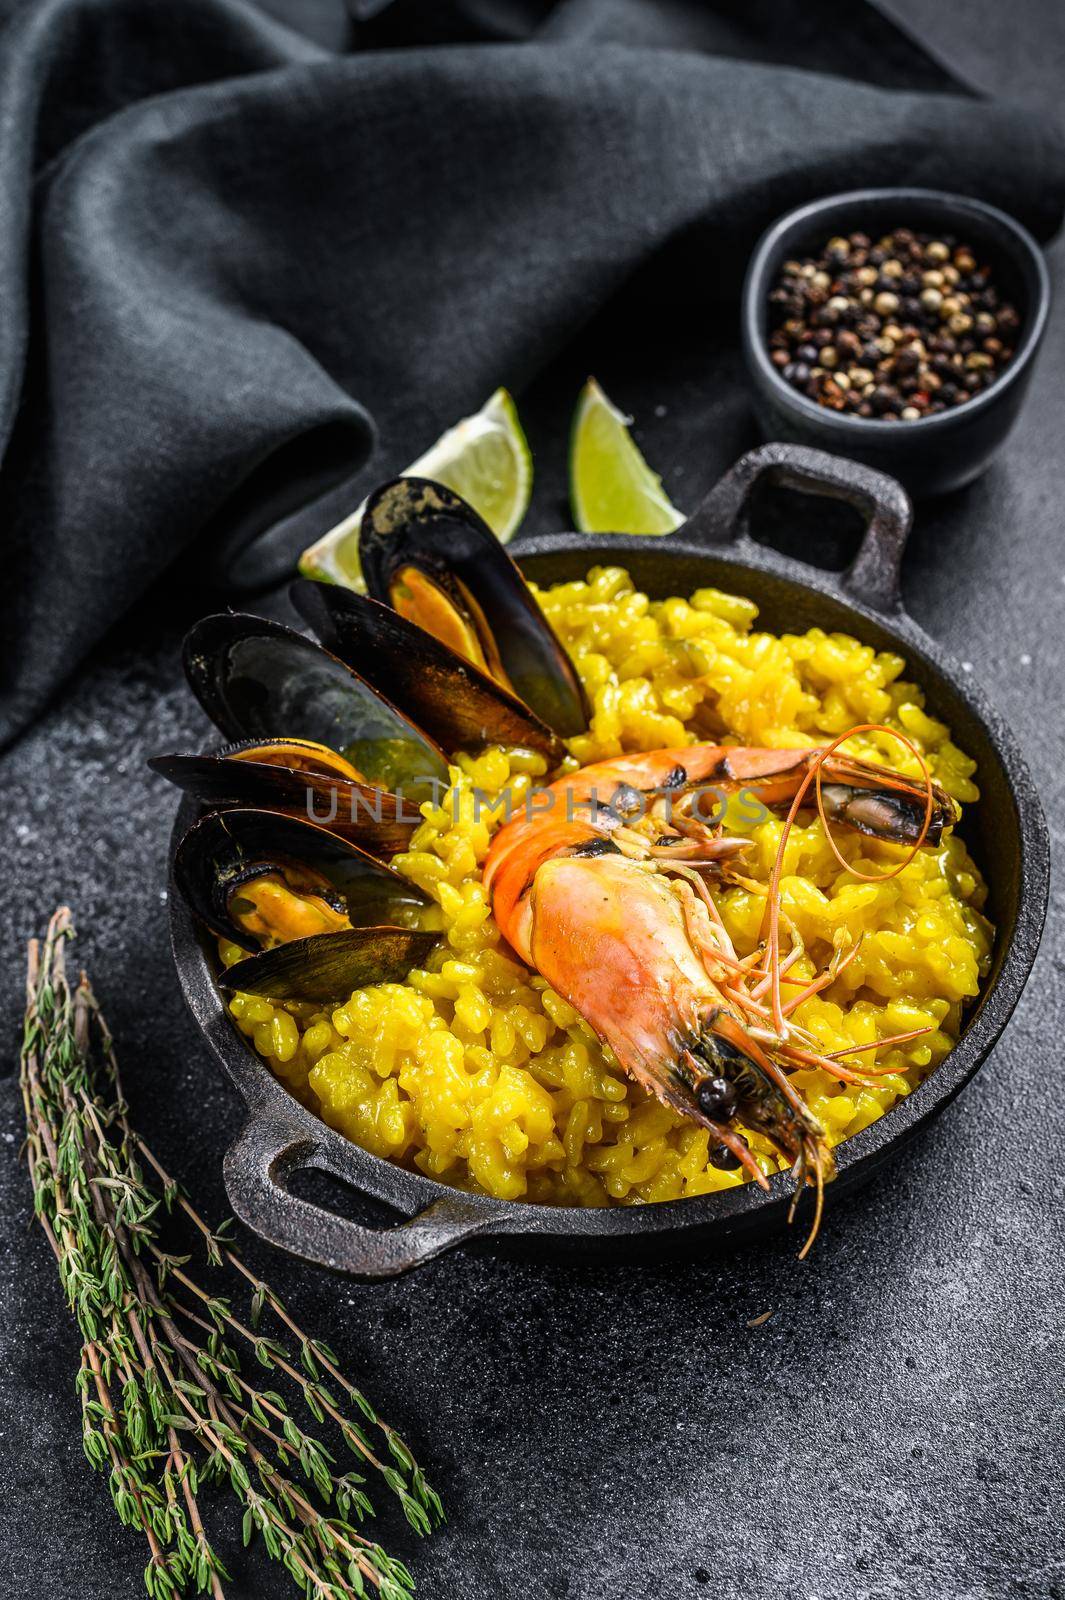 The Spanish paella with seafood prawns, shrimps, mussels. Black background. Top view by Composter